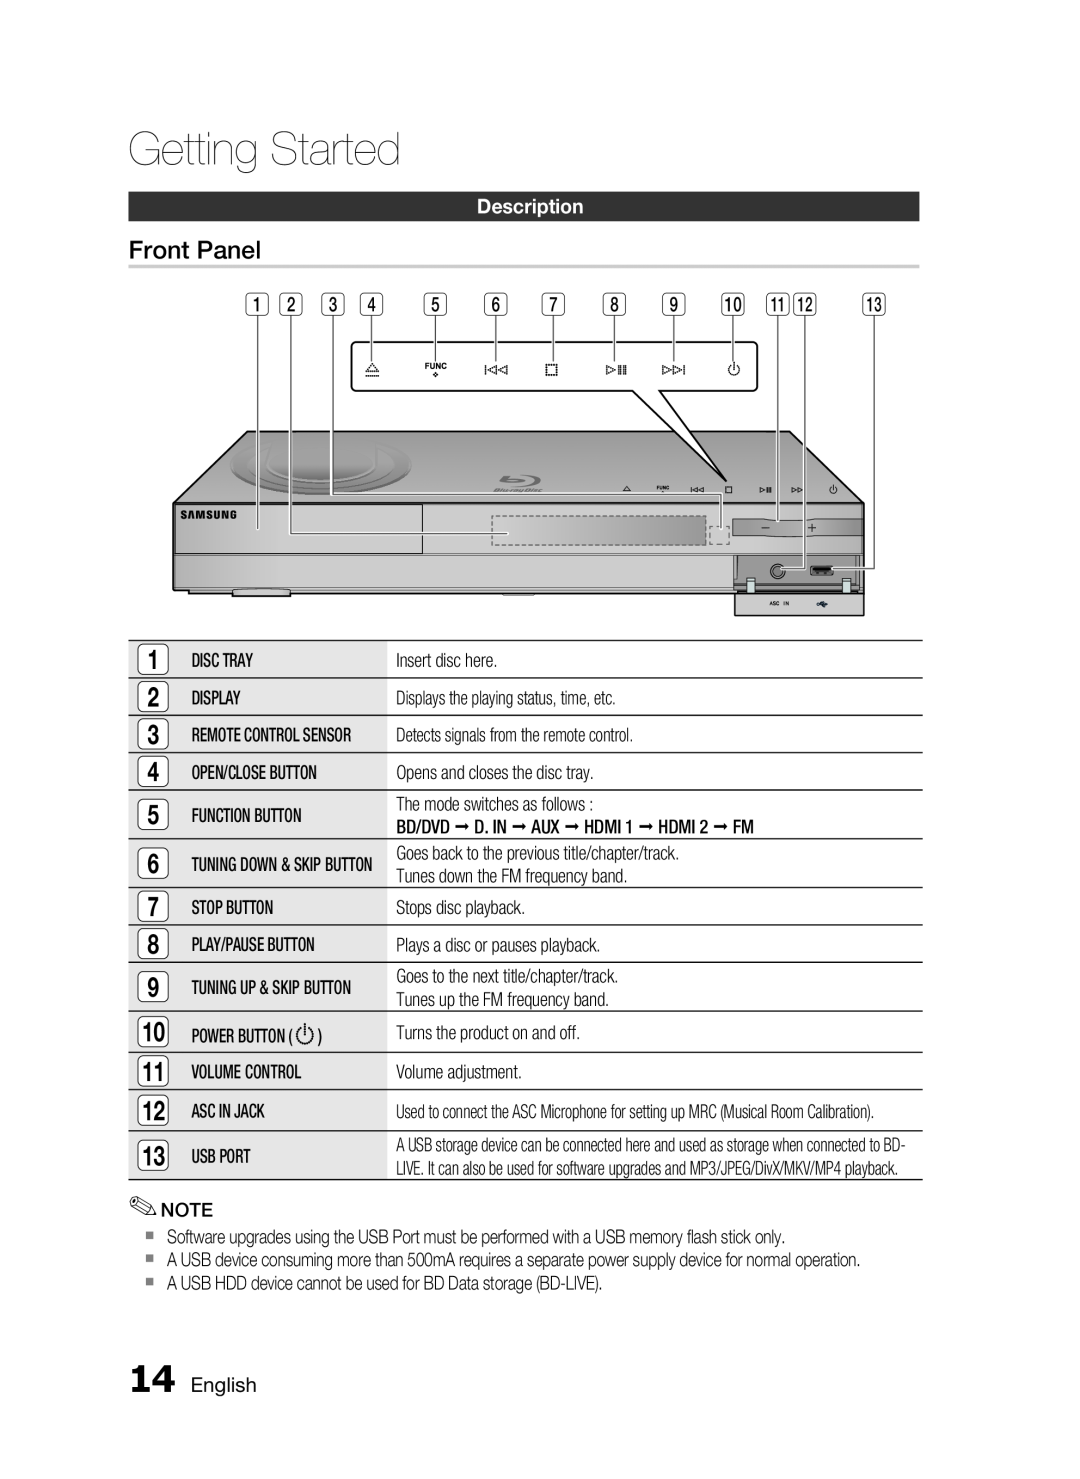 Samsung AH68-02290S, HT-C6730W user manual Front Panel, Description, Getting Started 